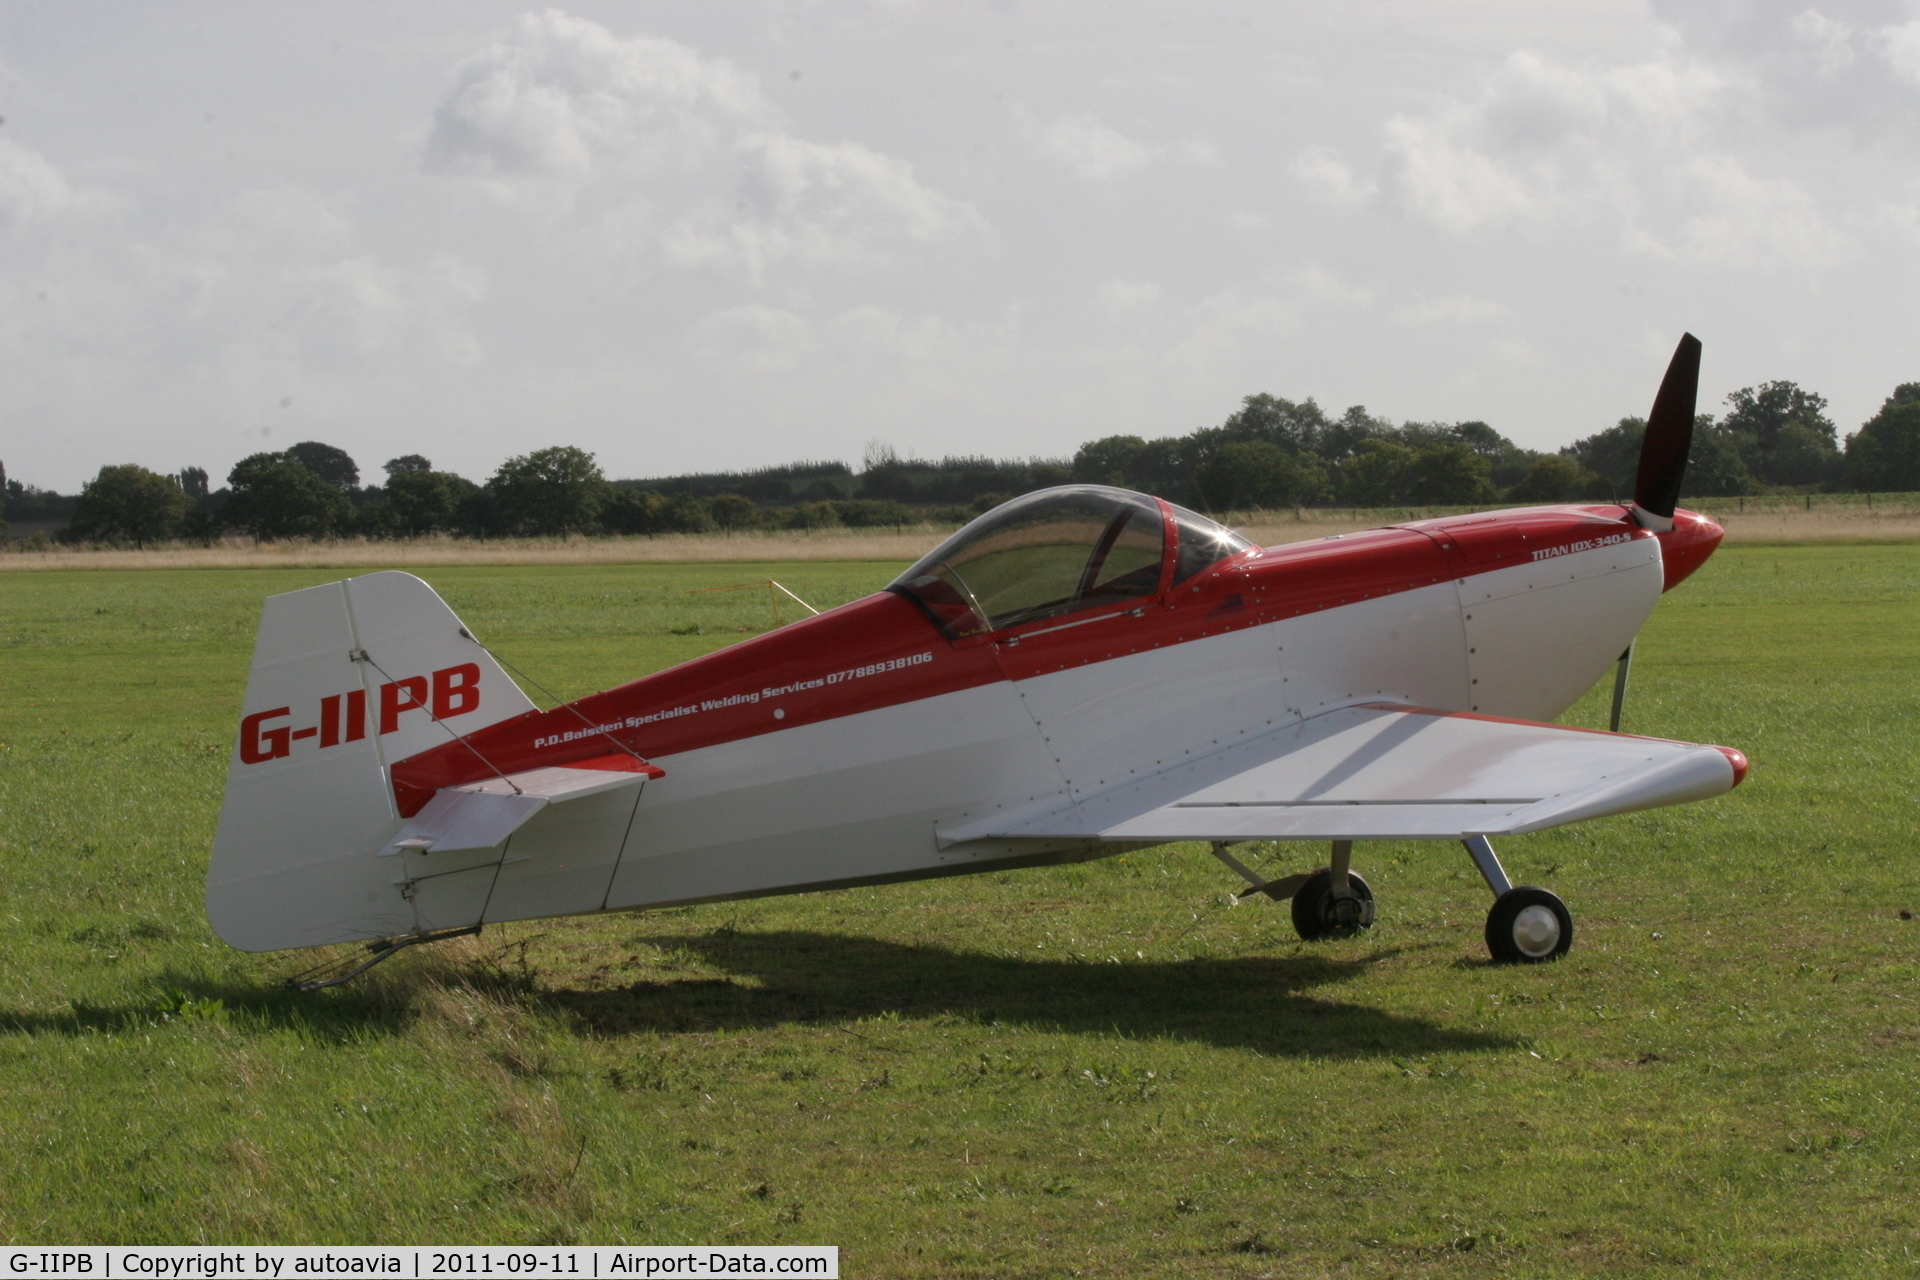 G-IIPB, Rihn DR-107 One Design C/N PFA 264-14538, Taken at the 2nd ever fly in at Stow Maries